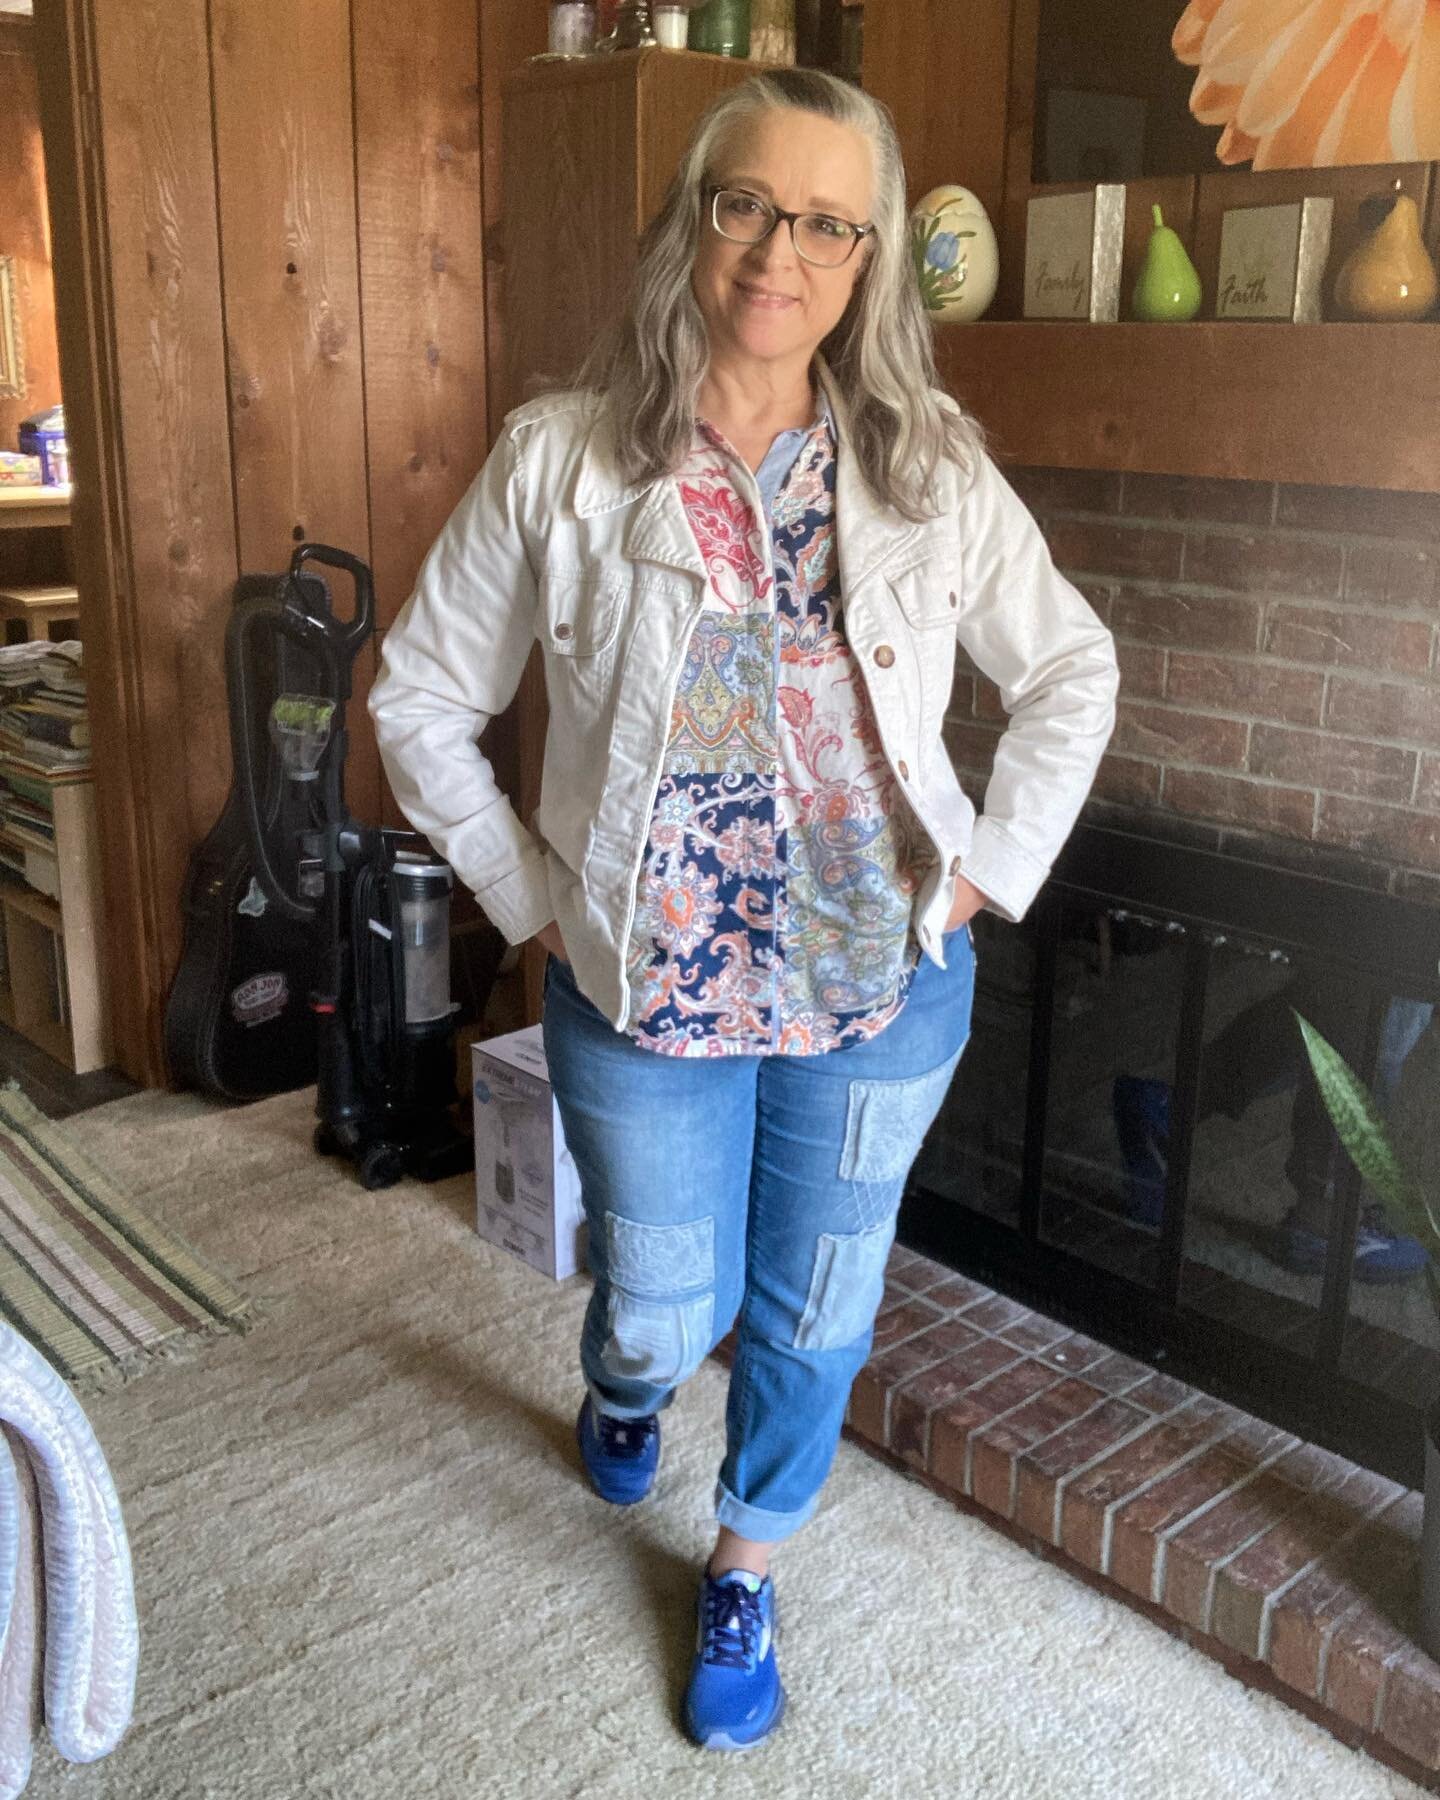 #mismatchmay style challenge. This week with our hosts @crafty_thrifting and @prelovedlotta - these ladies are doing some amazing up cycling and print mixing, so be sure to check them out. Today I am focusing on denim, layering and the idea that if I